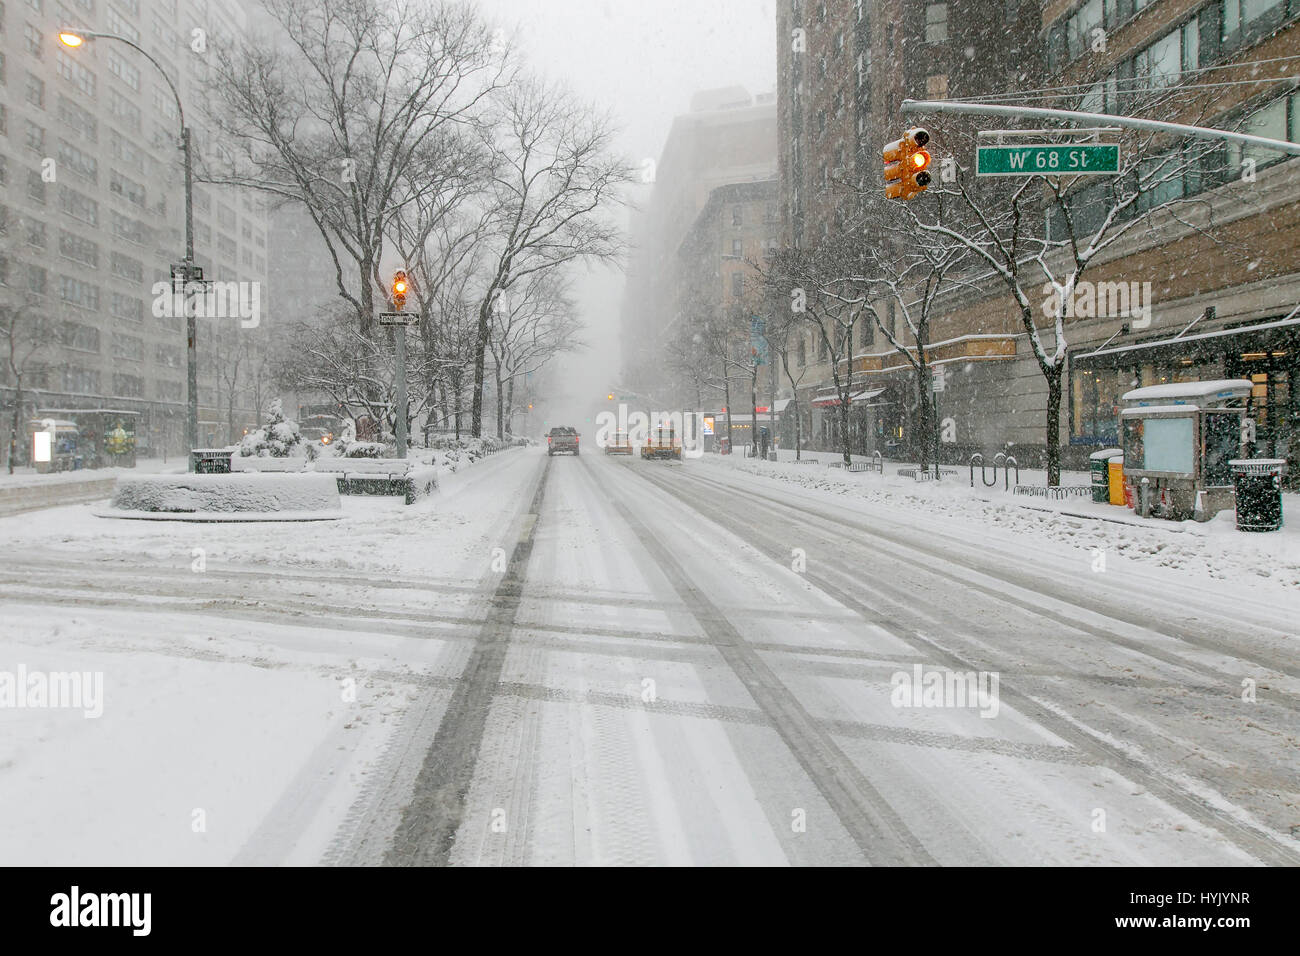 View of Broadway at 68th street during a heavy snowfall. Stock Photo